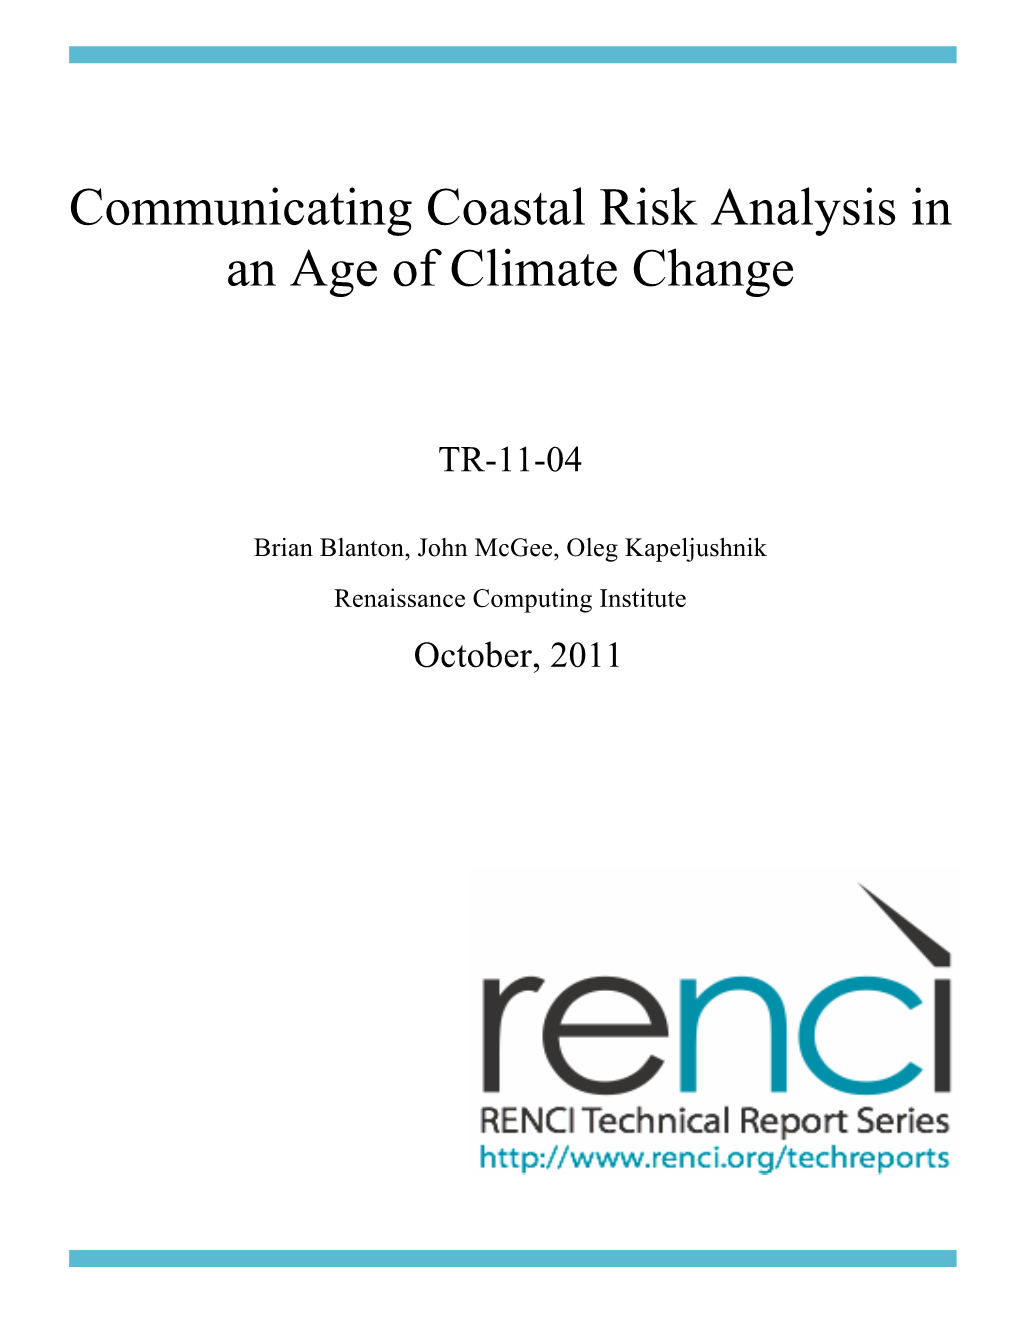 Communicating Coastal Risk Analysis in an Age of Climate Change